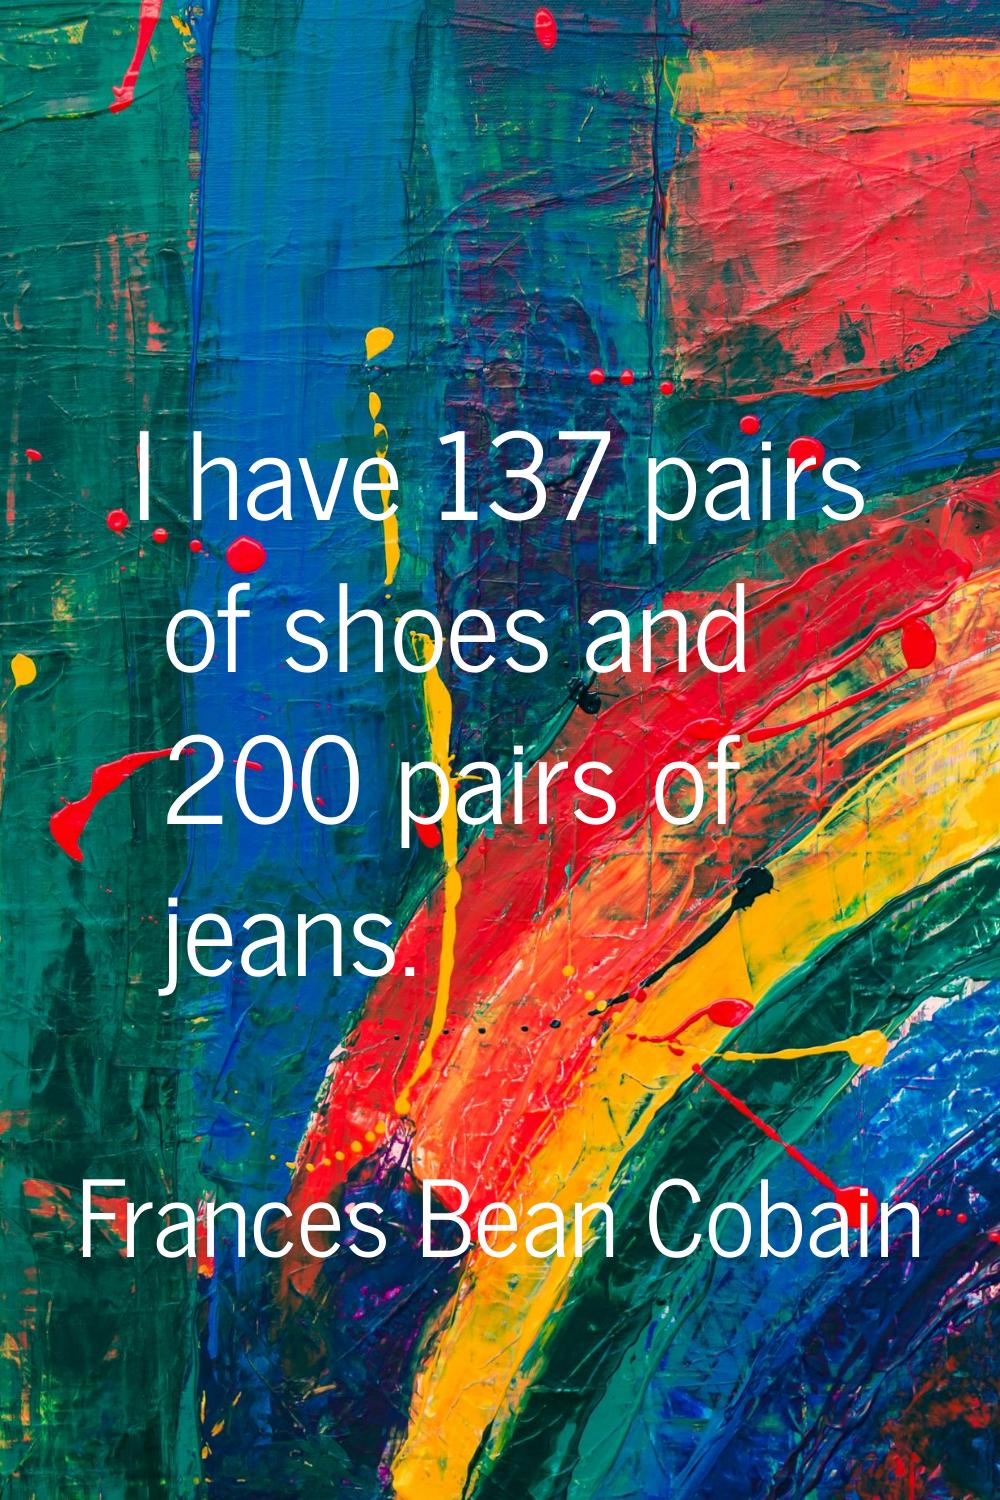 I have 137 pairs of shoes and 200 pairs of jeans.